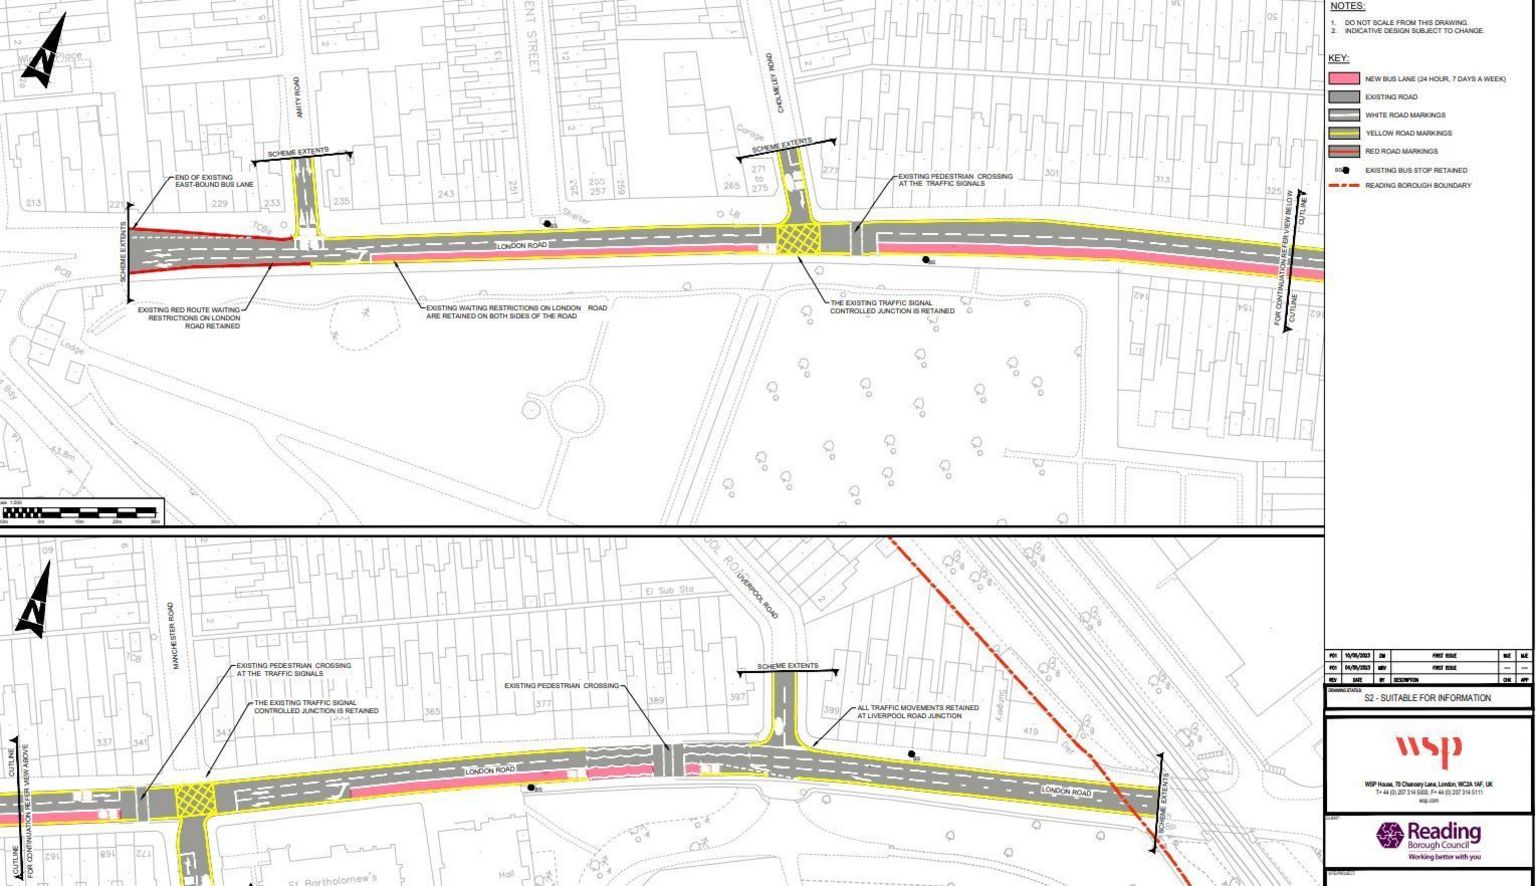 Plans for the new bus lane on London Road